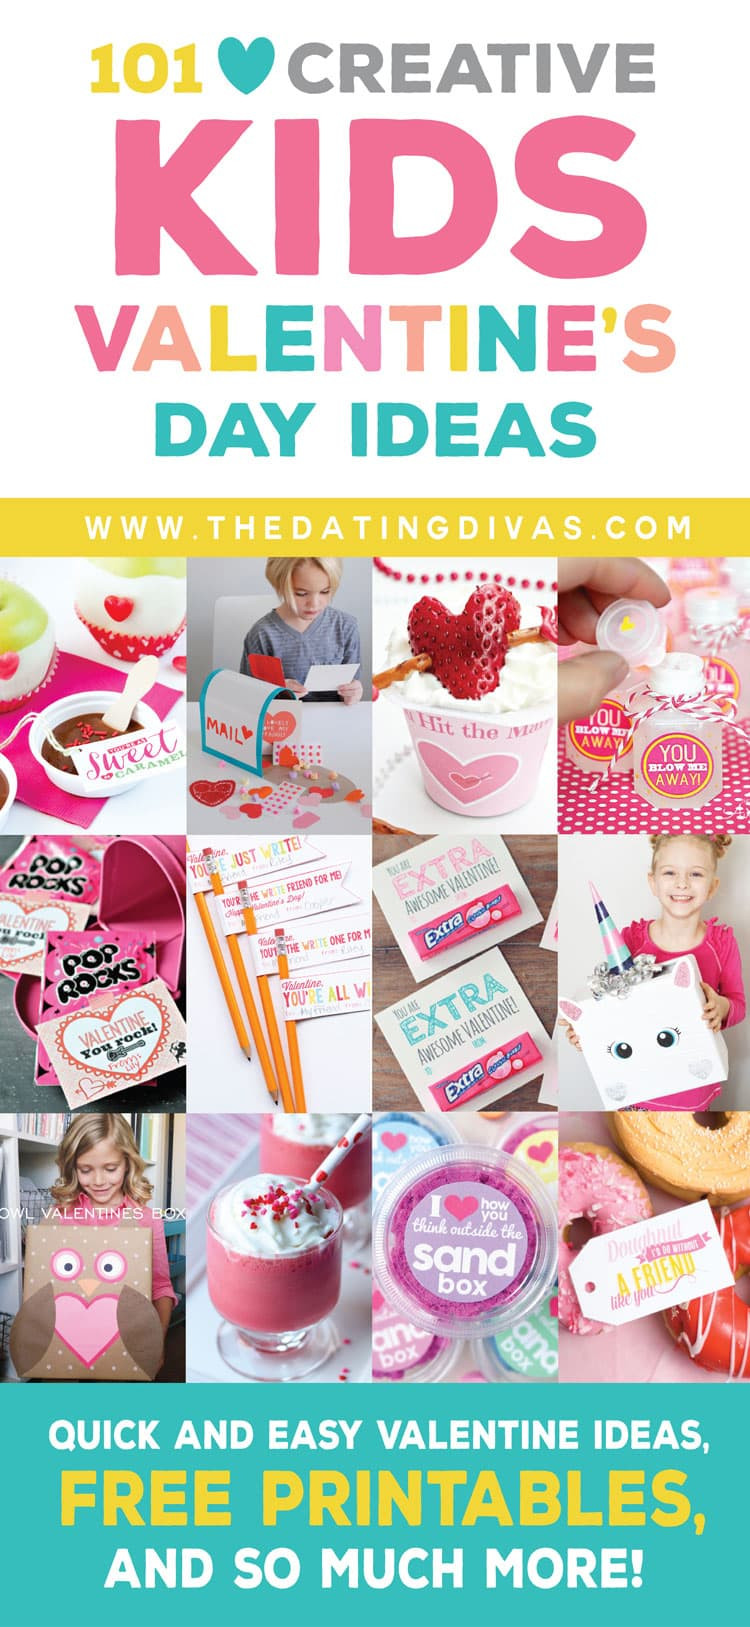 Valentines Gifts Kids
 Kids Valentine s Day Ideas From The Dating Divas